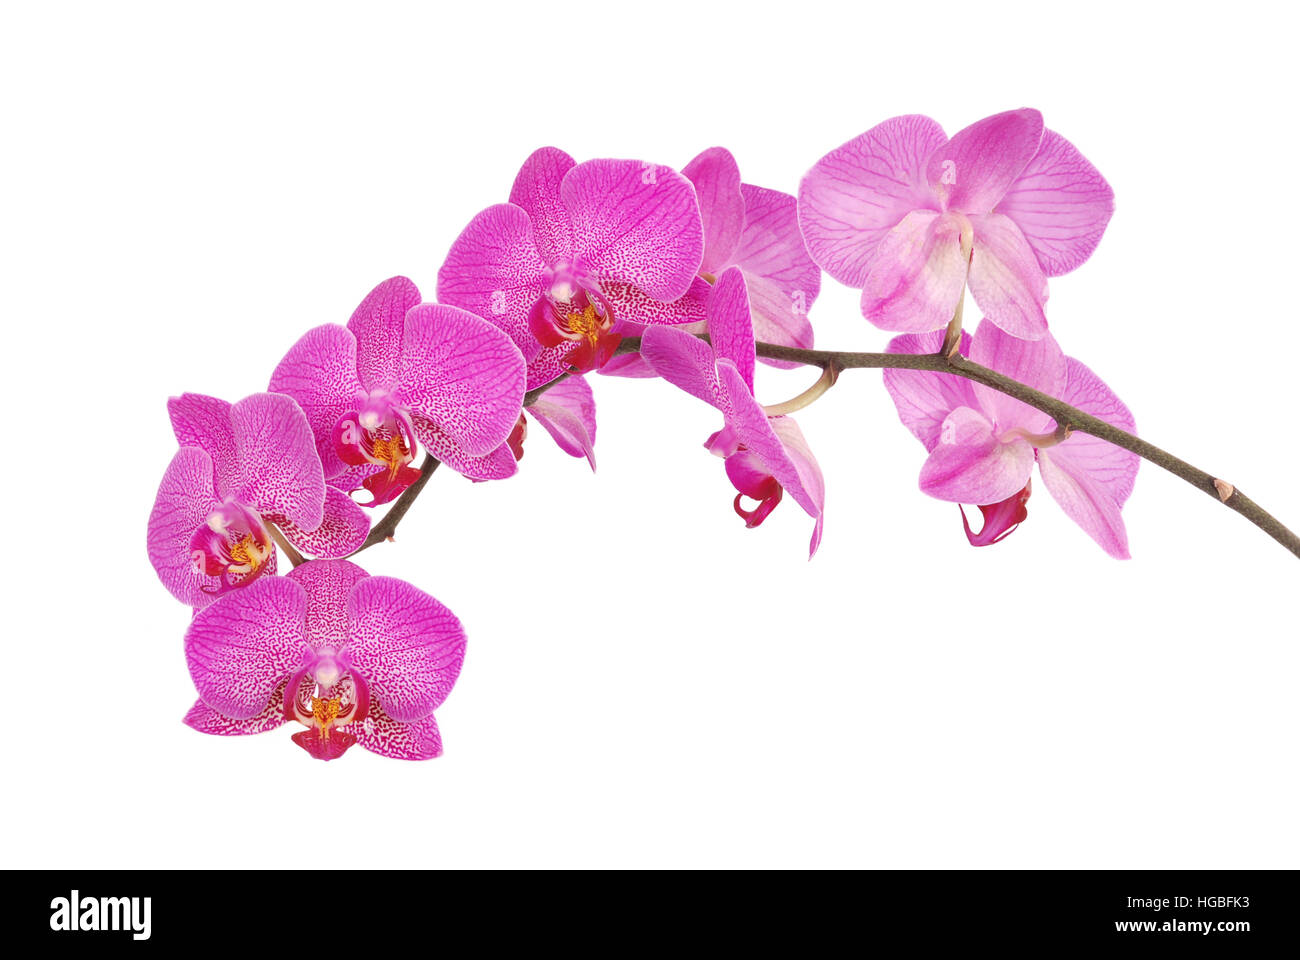 Purple orchid flower with veins isolated on a white background Stock Photo